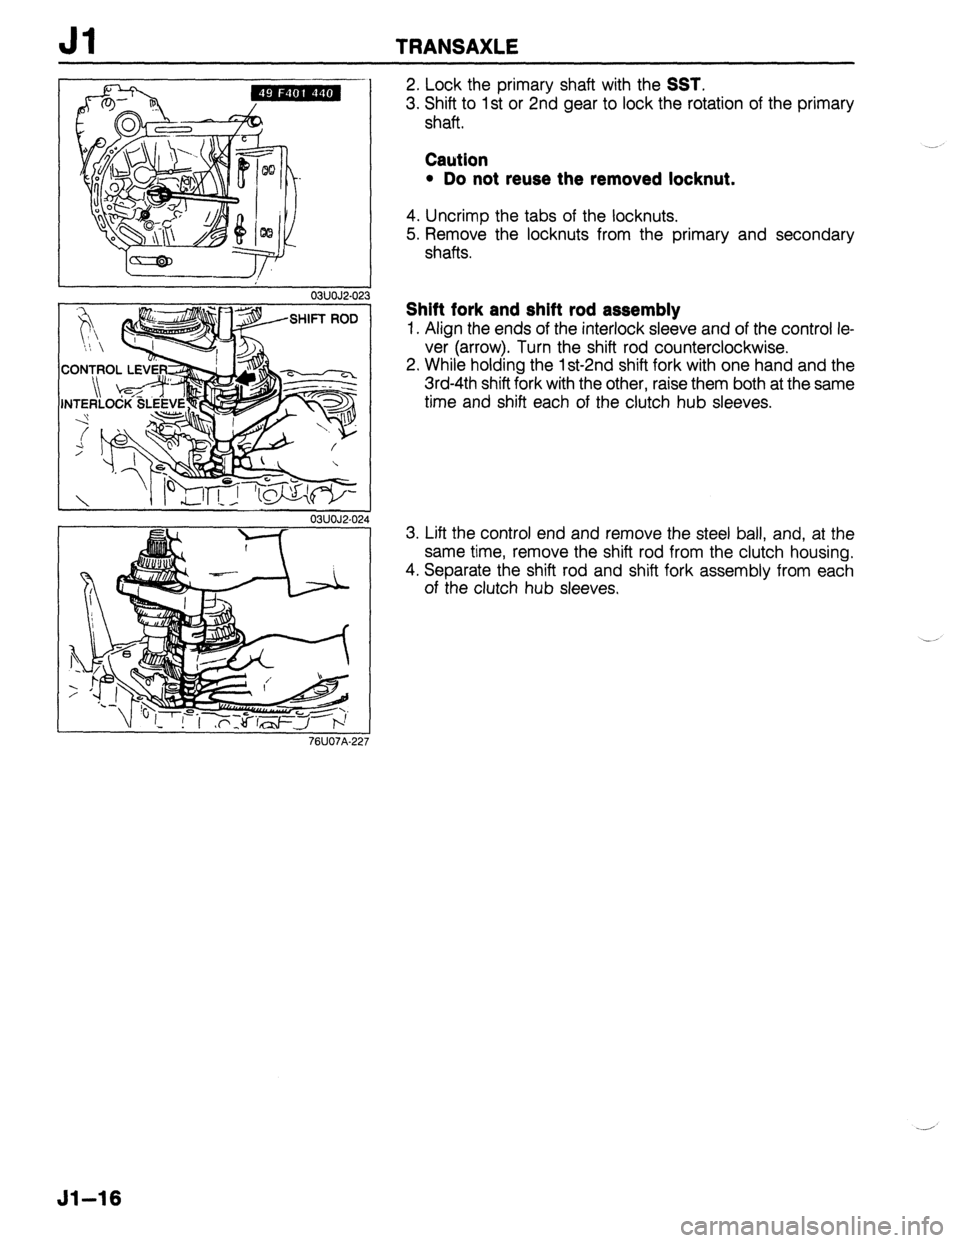 MAZDA PROTEGE 1992  Workshop Manual Jl TRANSAXLE 
SHIFT ROD “I, - 
CON-rPOL LEVE$:, 
I I 03UOJ2.0 
76U07A.22 
2. Lock the primary shaft with the SST. 
3. Shift to 1 st or 2nd gear to lock the rotation of the primary 
shaft. 
Caution 
